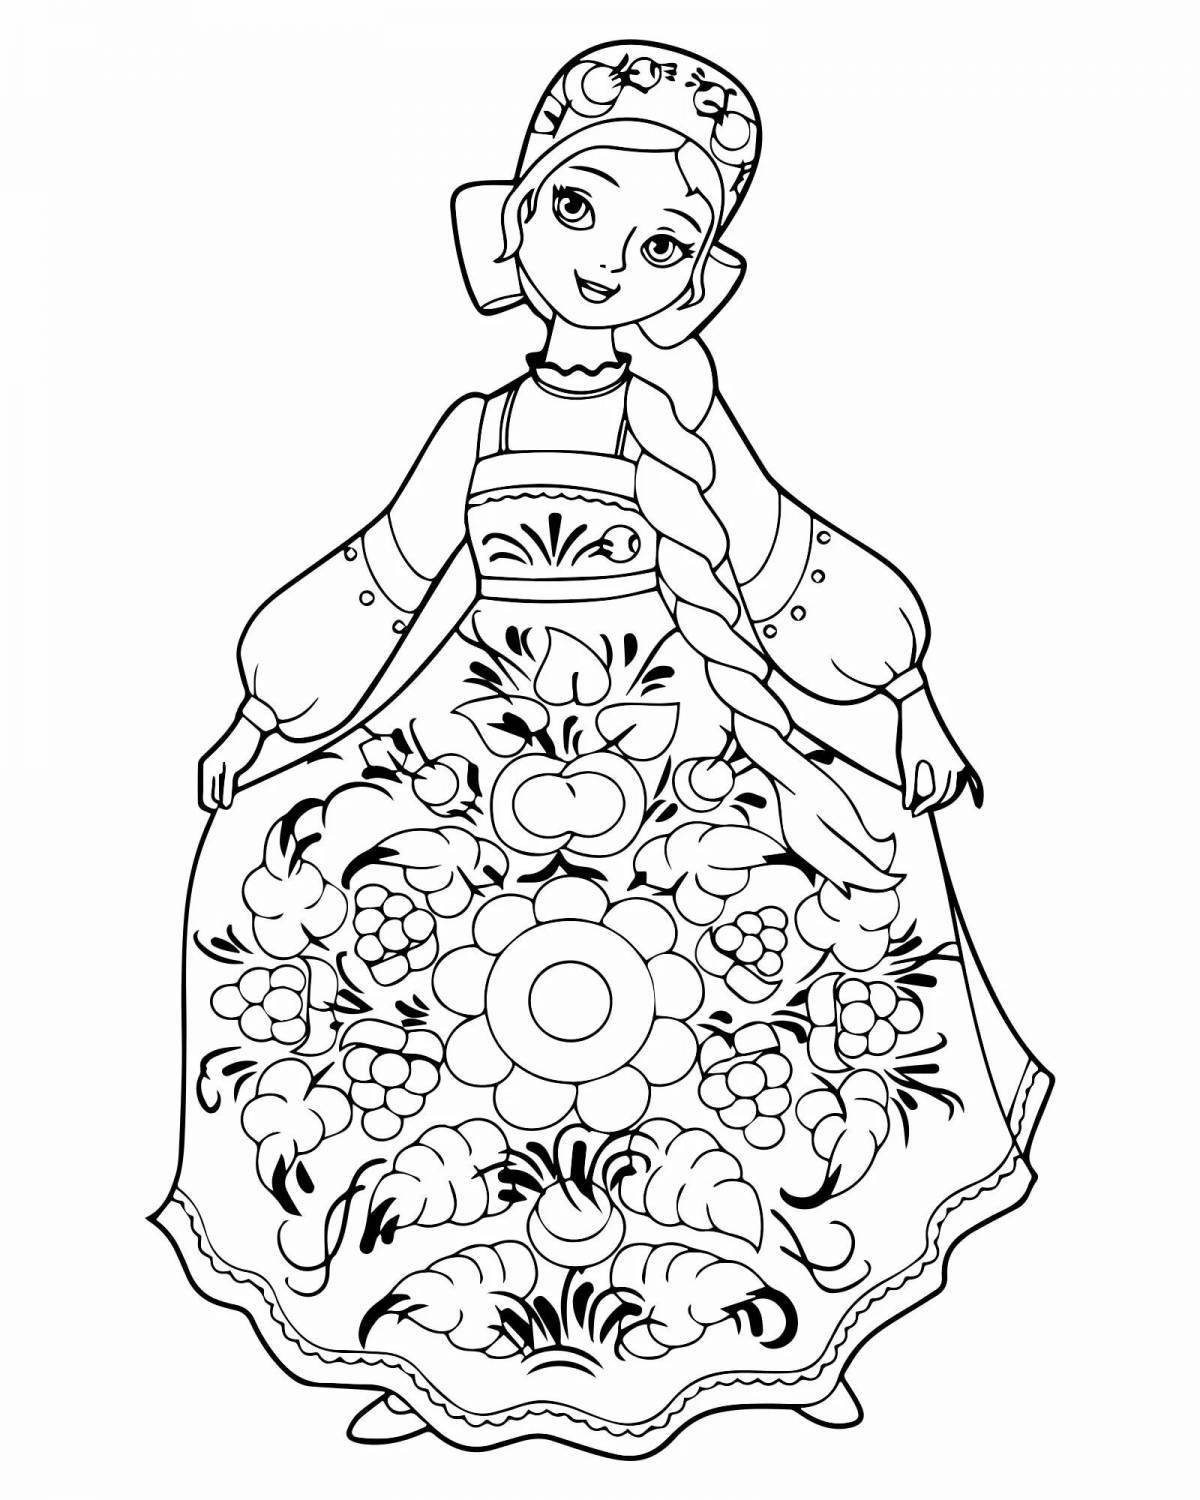 Great Russian folk coloring book for kids